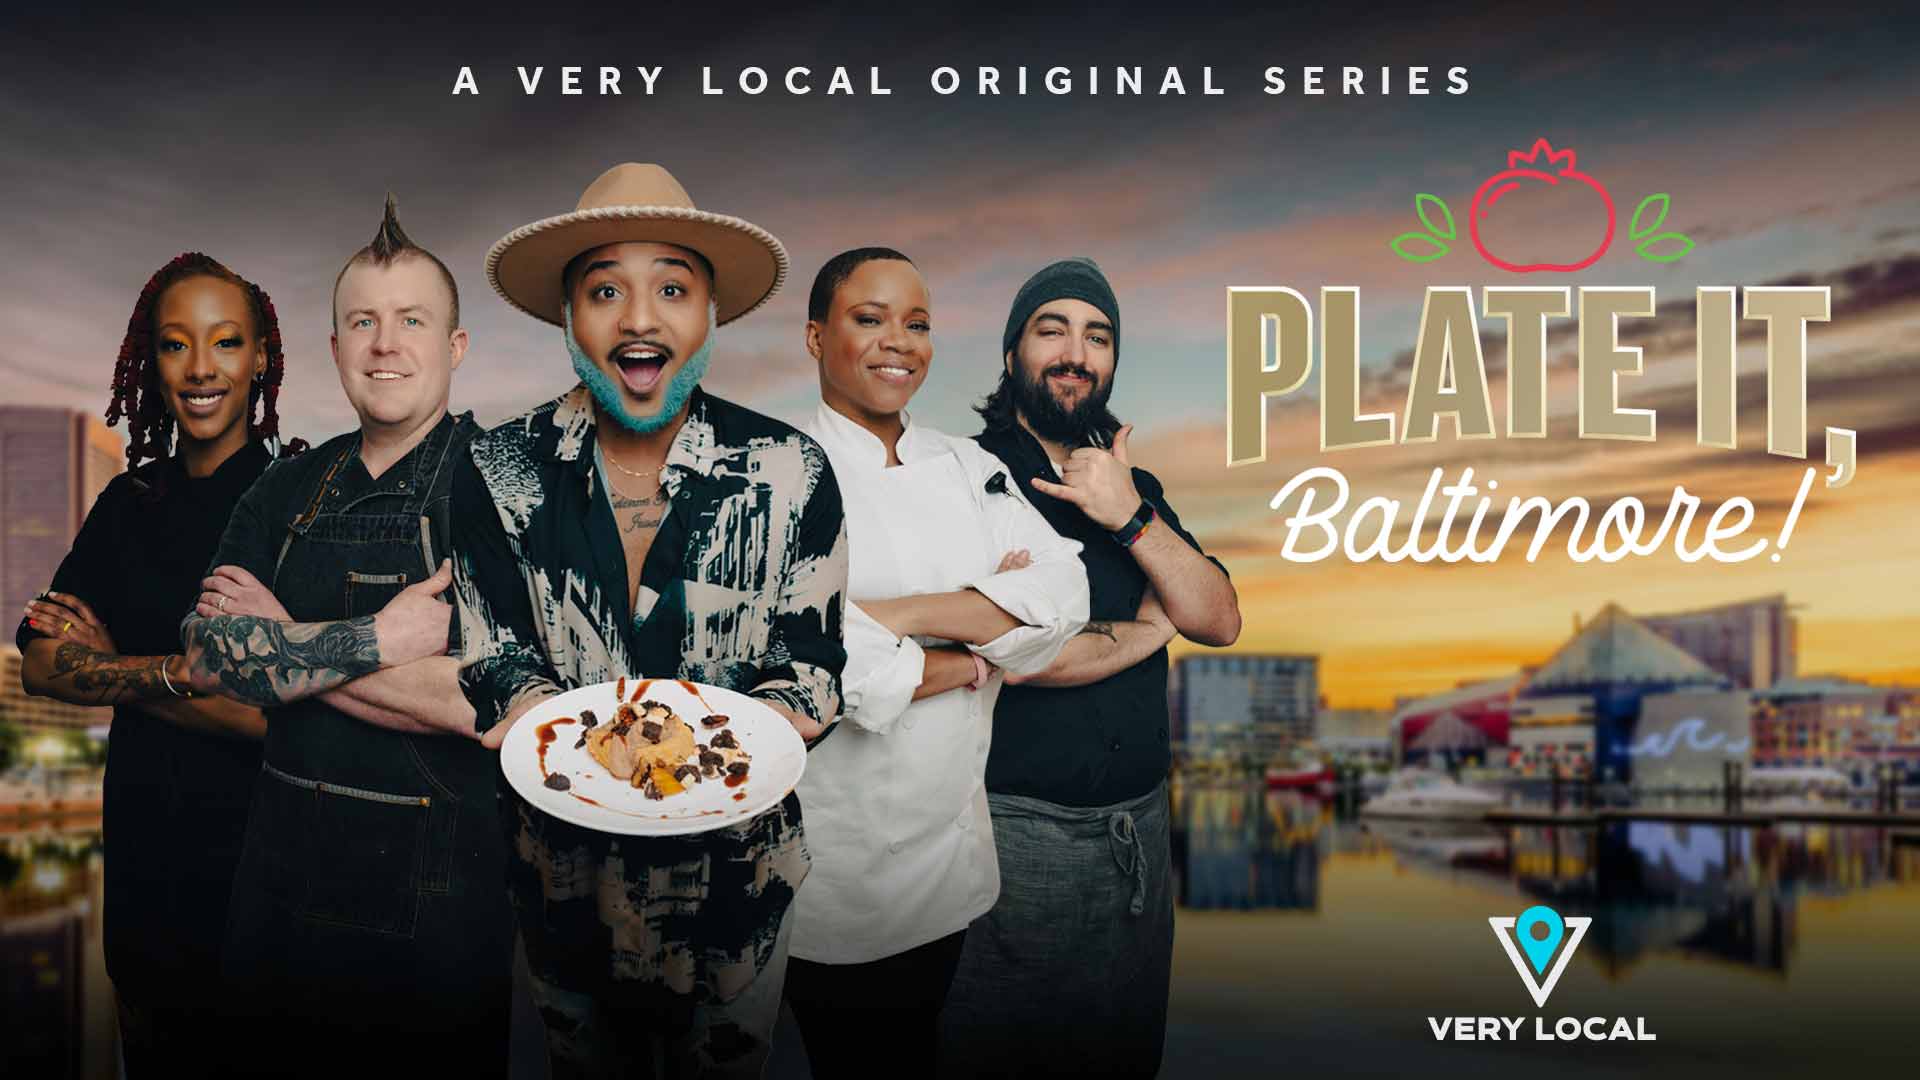 Stream Plate it, Baltimore available only on the Very Local app. FREE DOWNLOAD